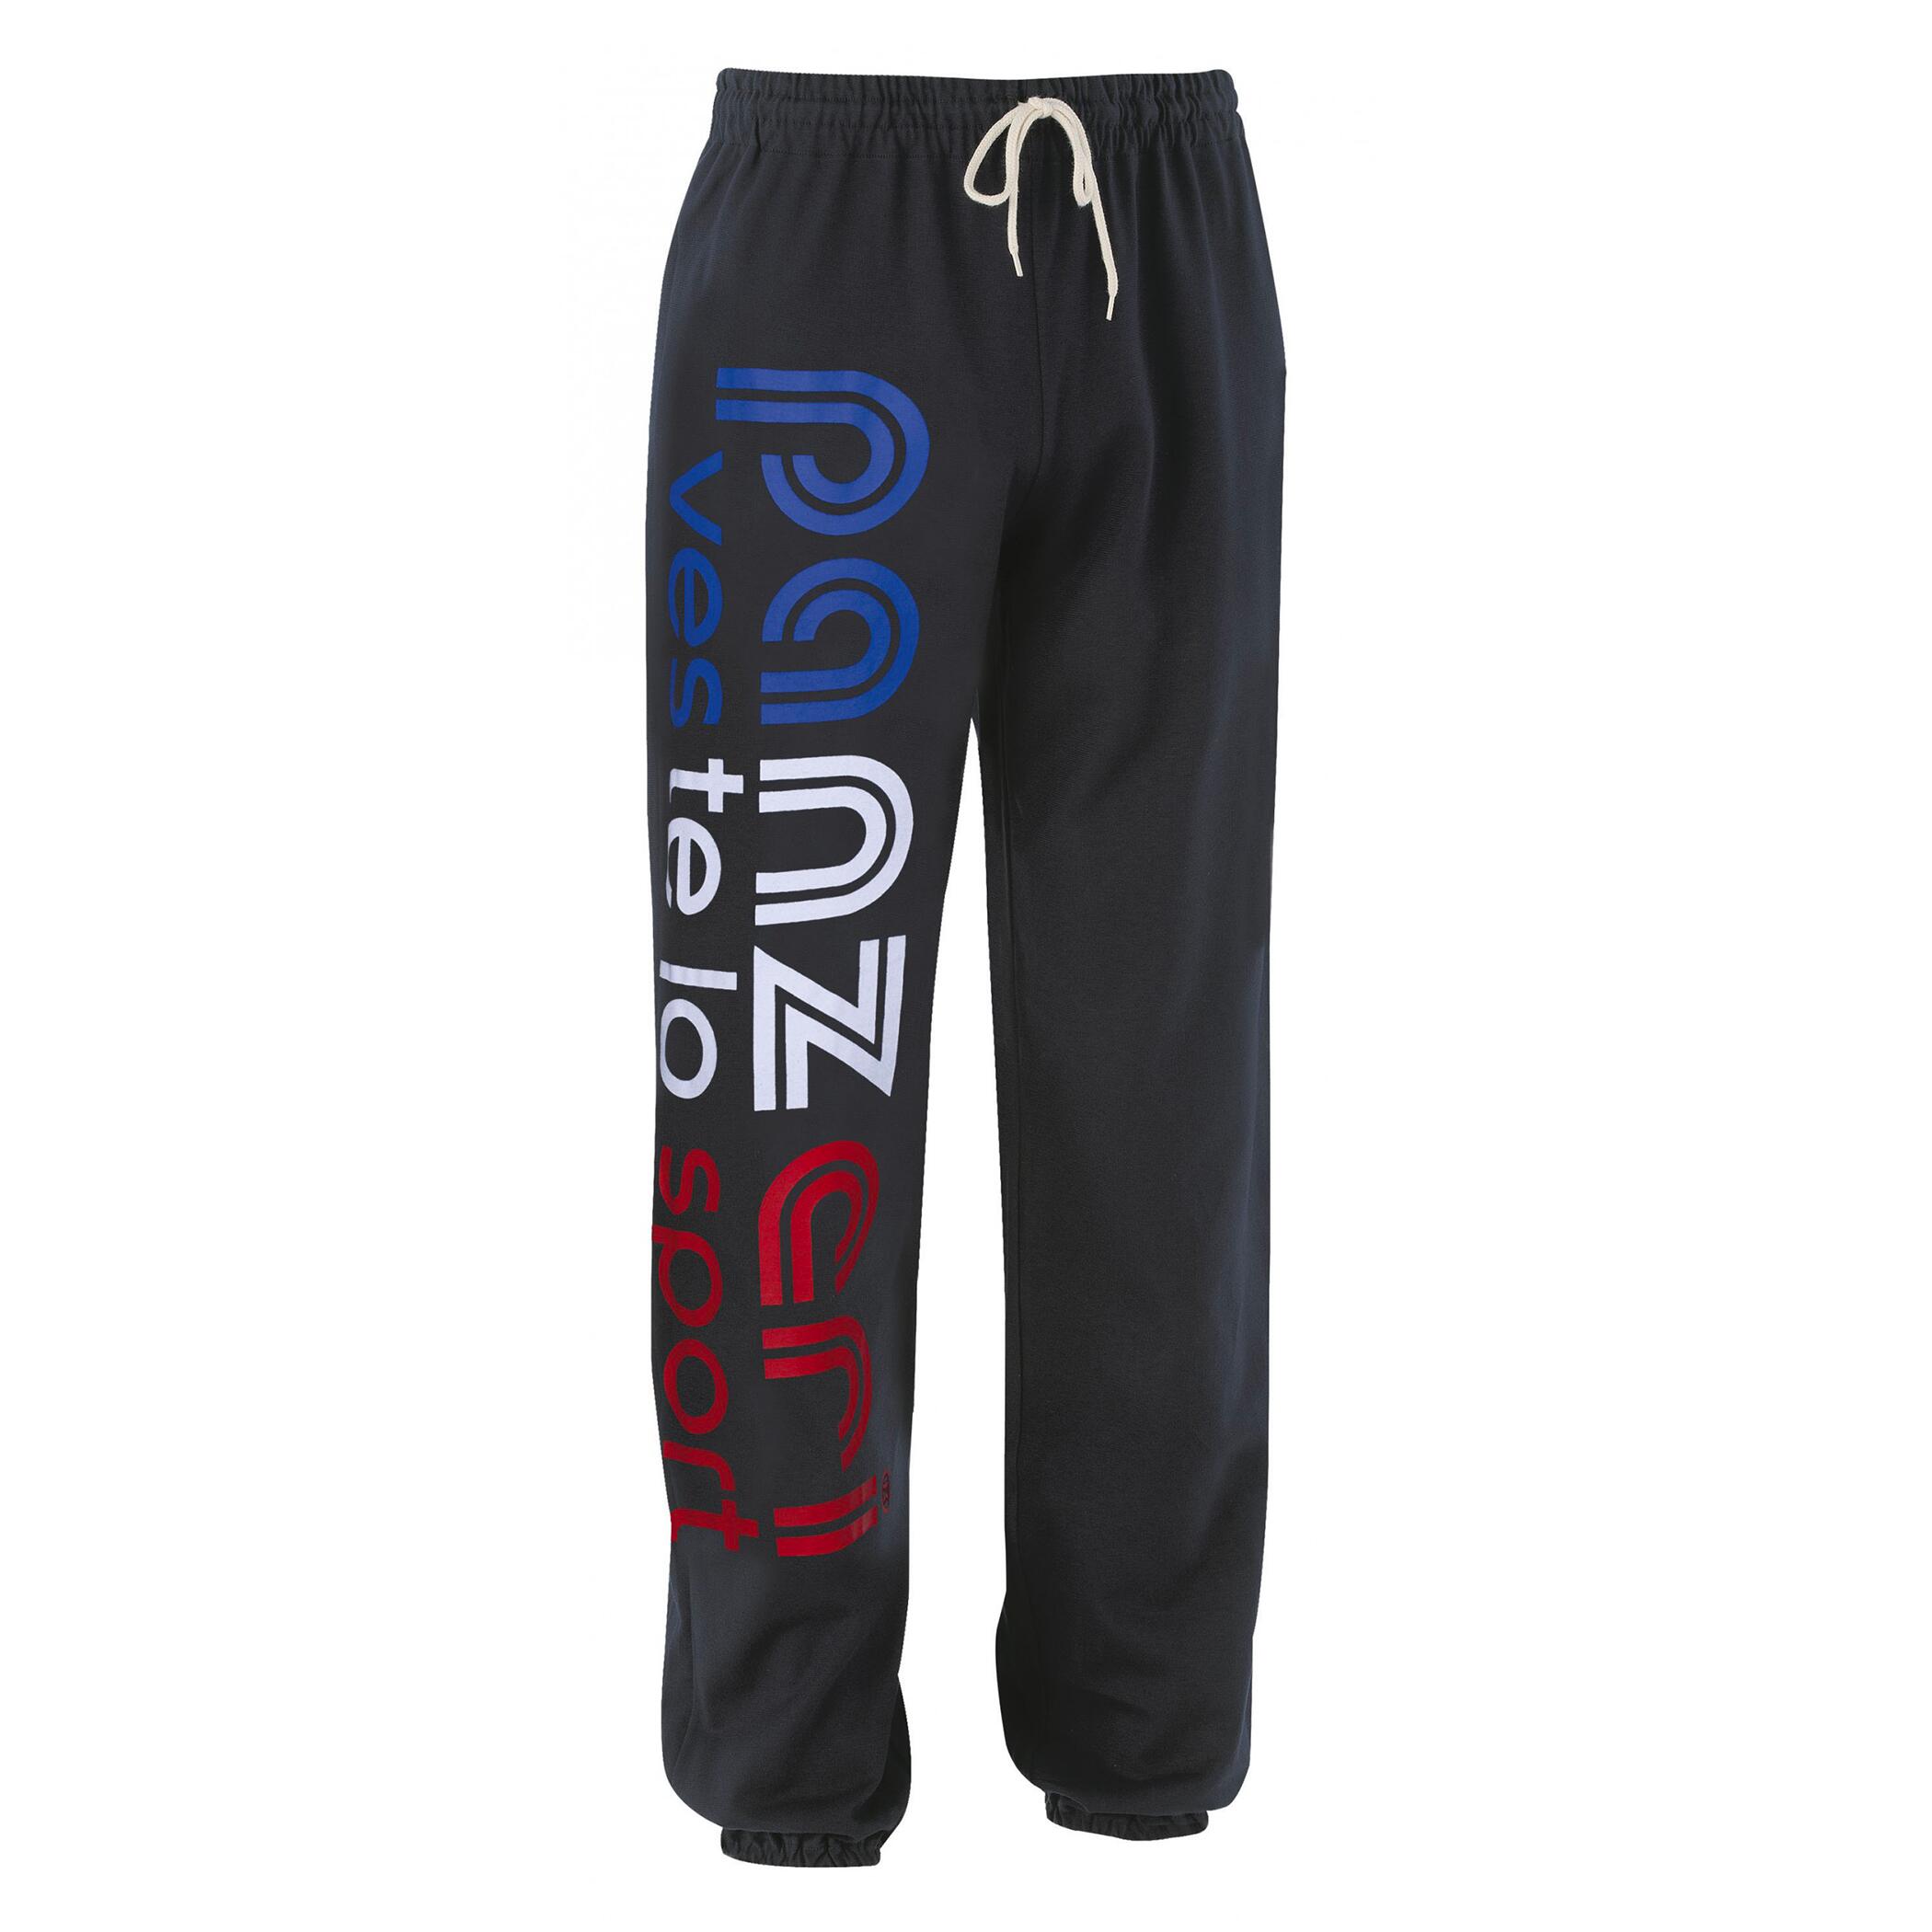 PANZERI Tracksuit Bottoms - Blue/White/Red